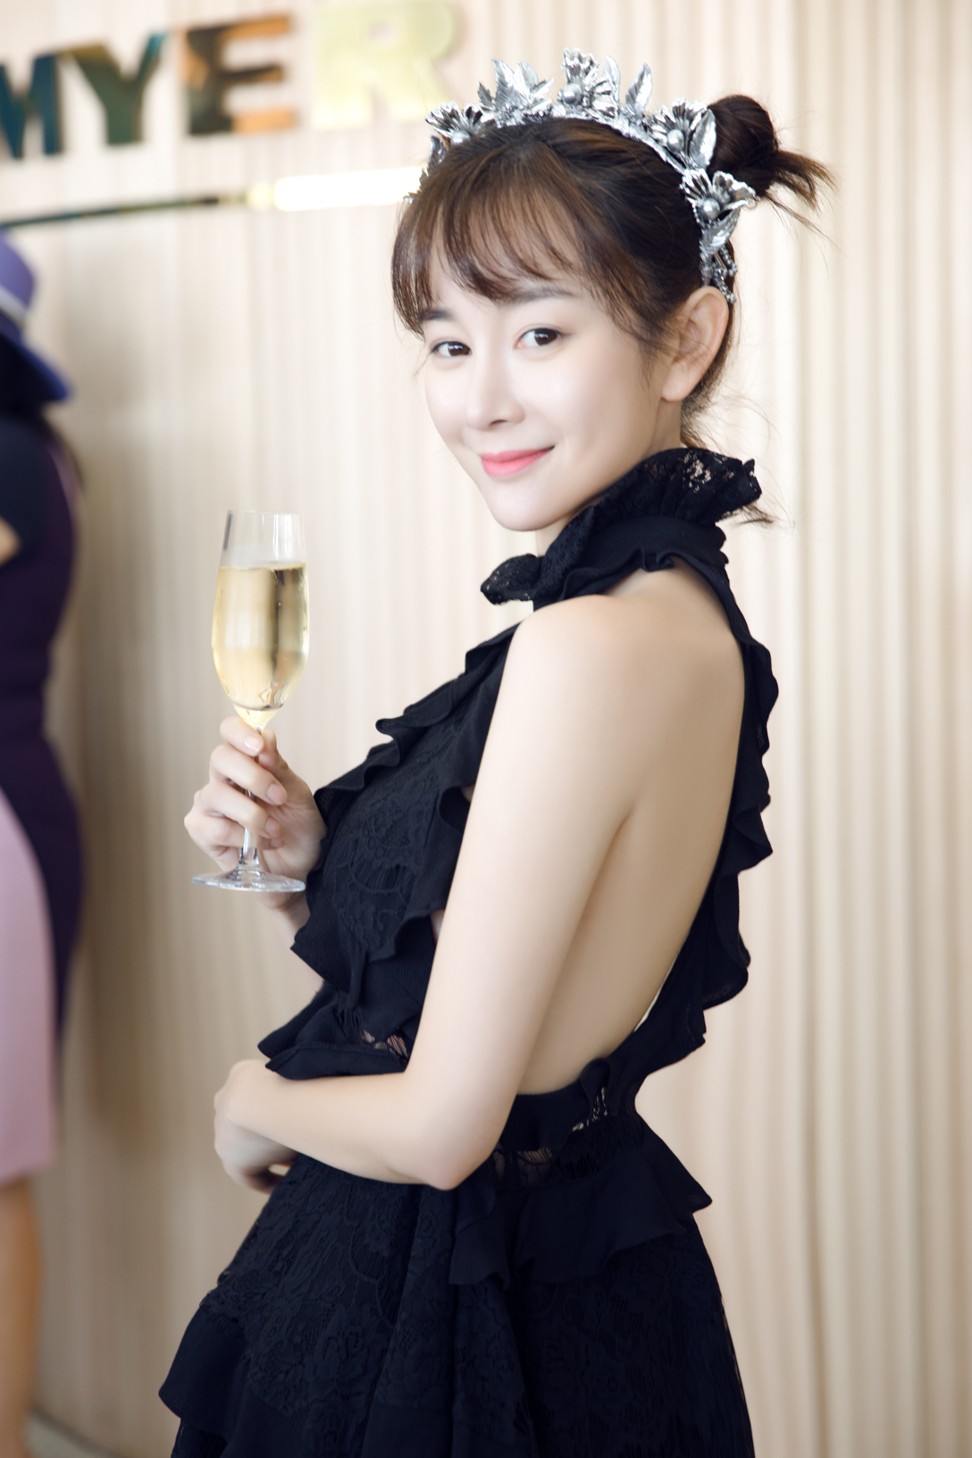 Zhang poses in an Elliatt dress with champagne in hand during the Spring Racing Carnival in Melbourne.